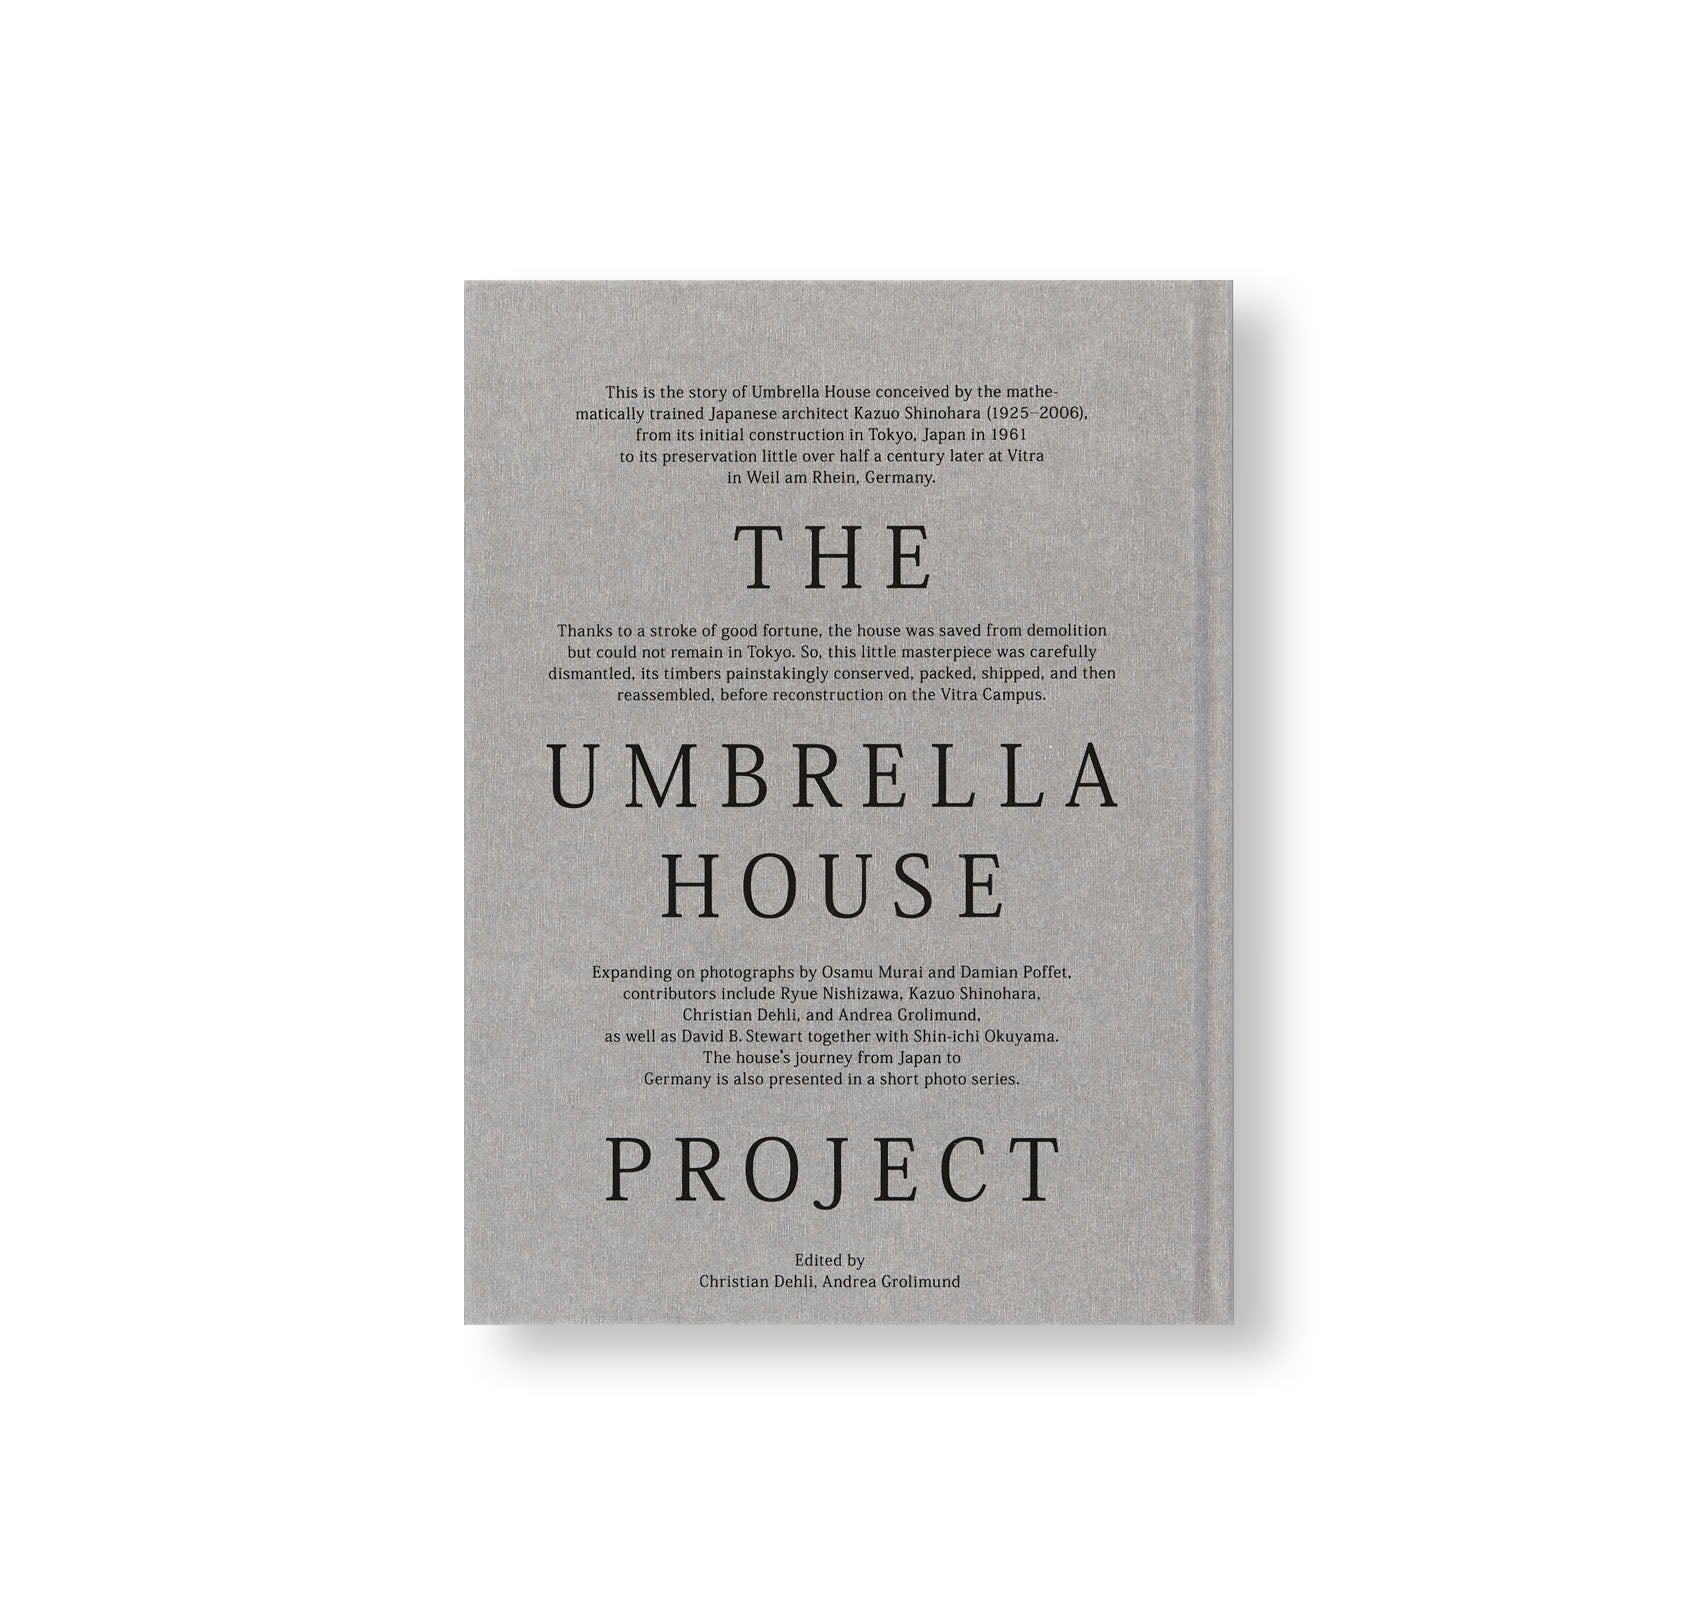 KAZUO SHINOHARA: THE UMBRELLA HOUSE PROJECT by Christian Dehli and Andrea Grolimund